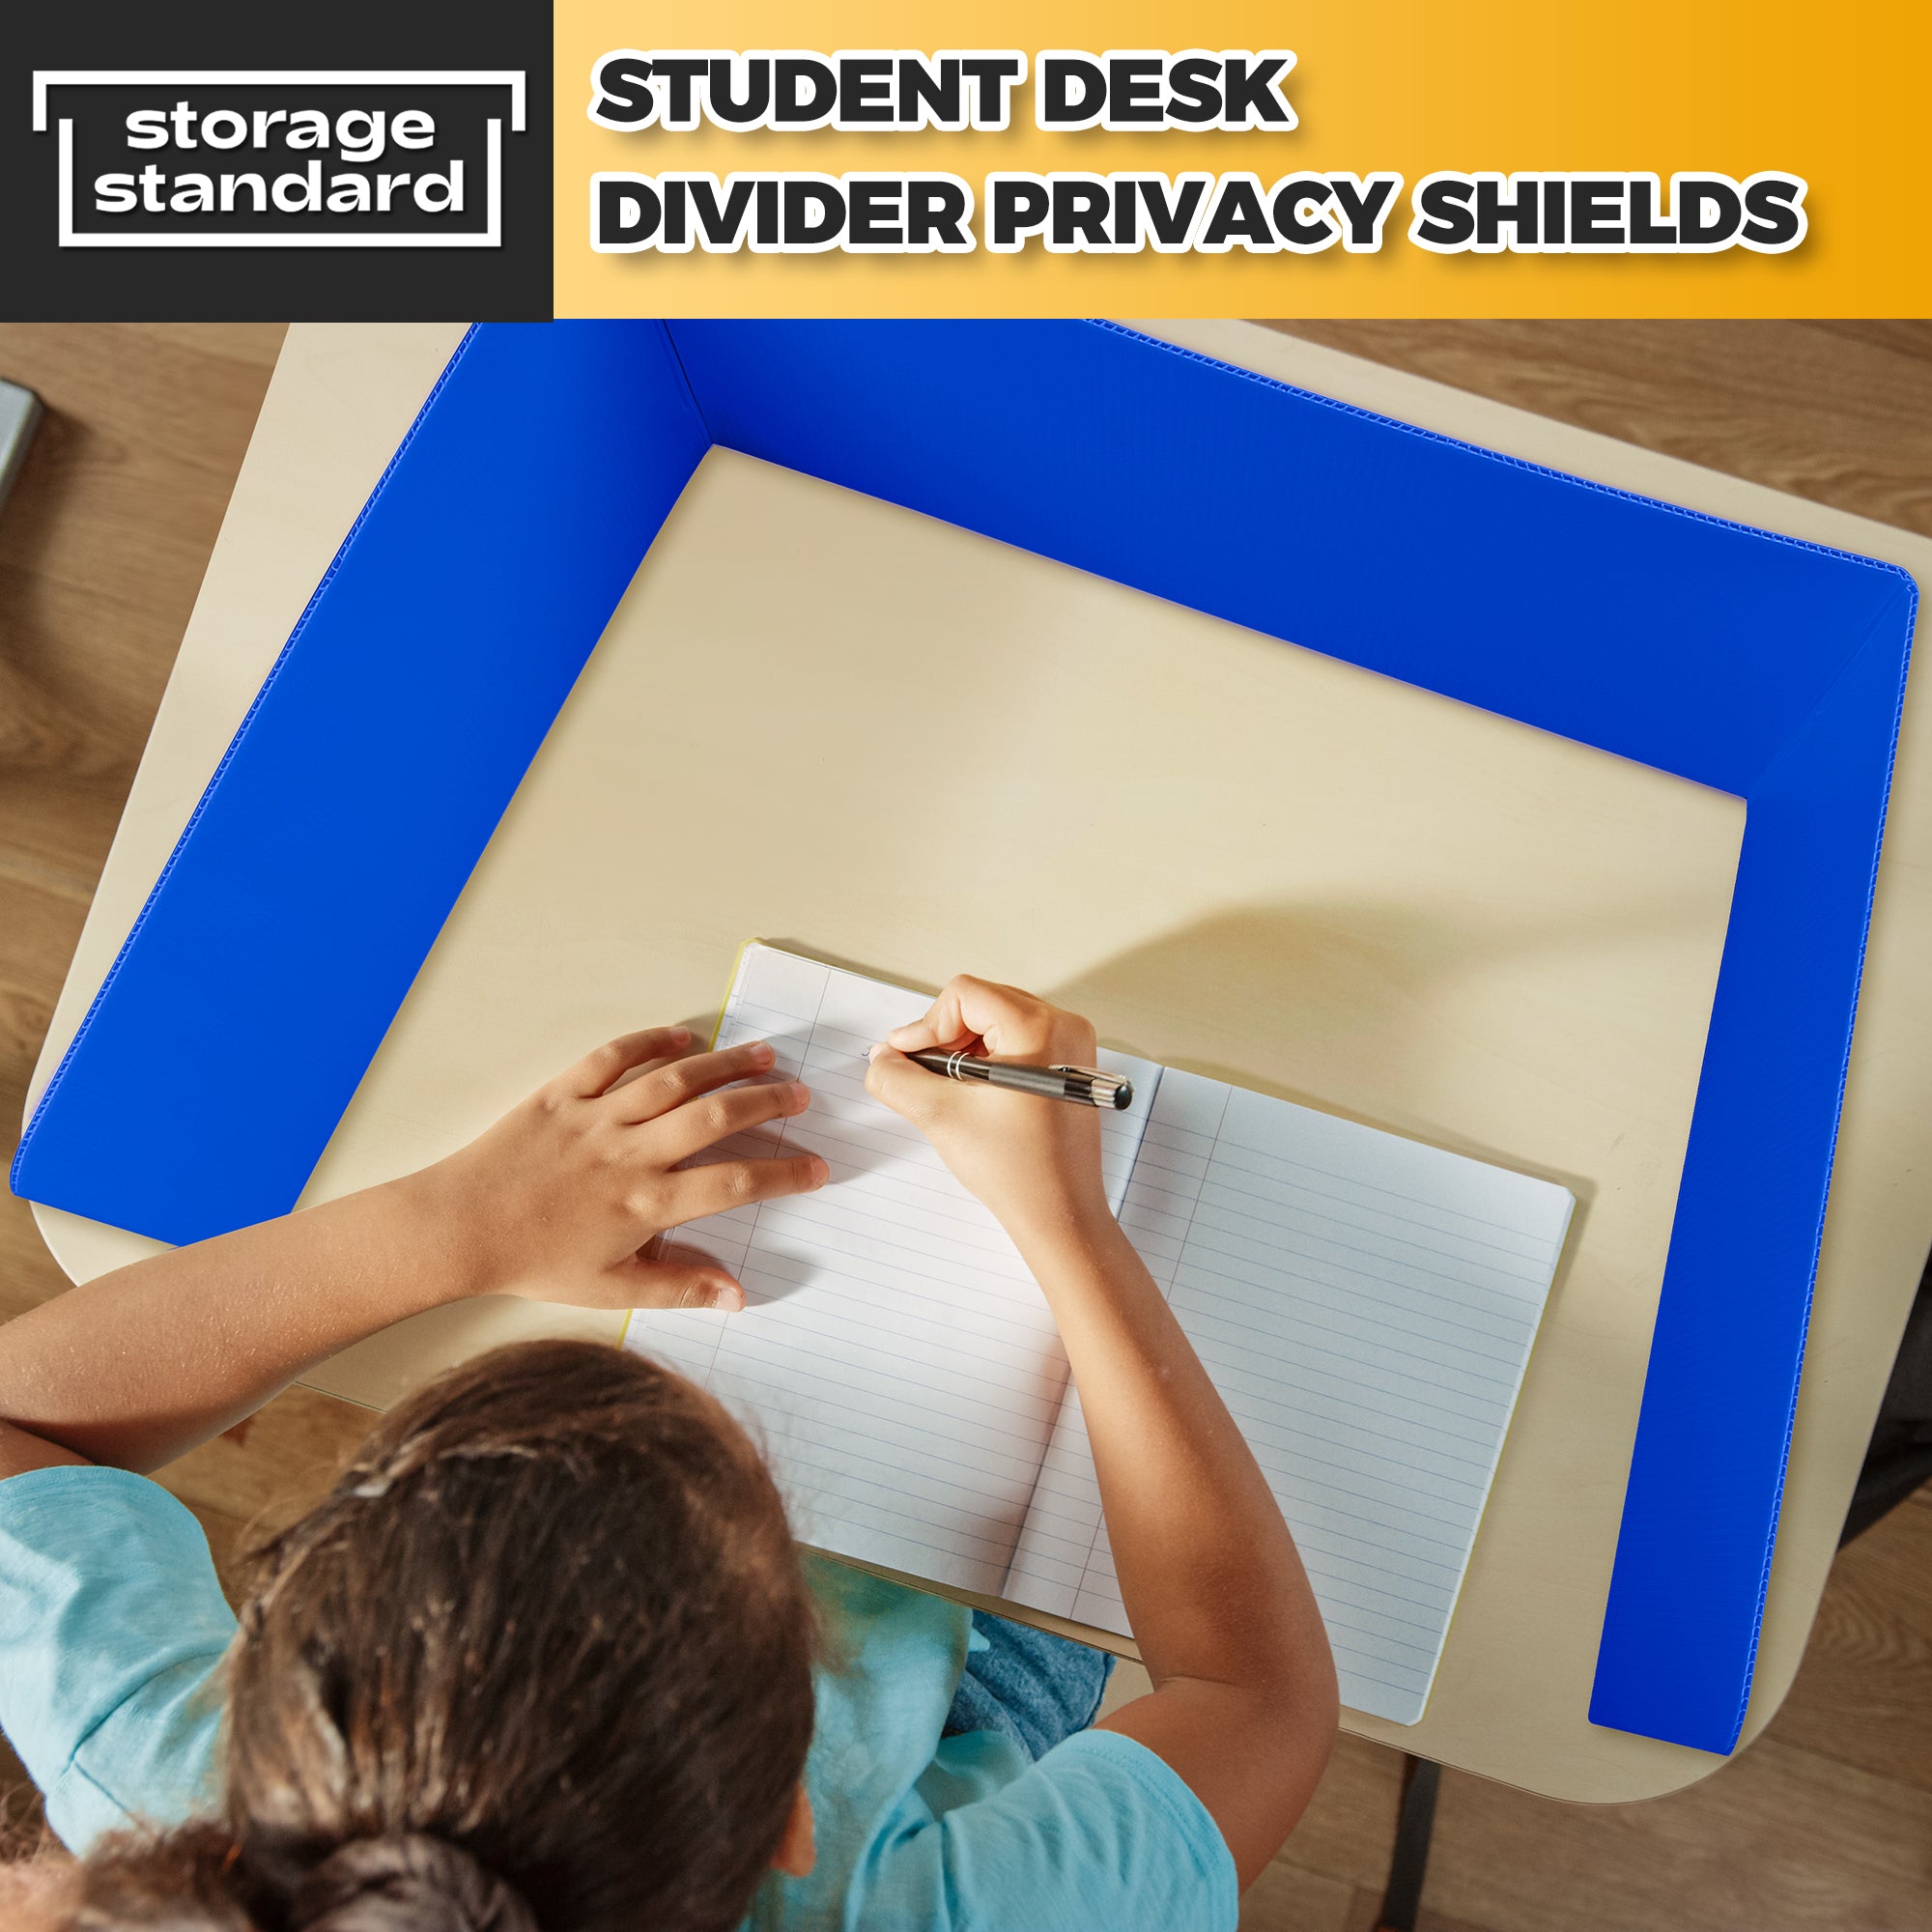 4-Pack Classroom Privacy Shields Desk Dividers for Student Desks - Assorted Colors Easy to Clean Plastic Sneeze Guard Folder Board Study Carrel - Divider Shield Classroom Materials for School Teachers